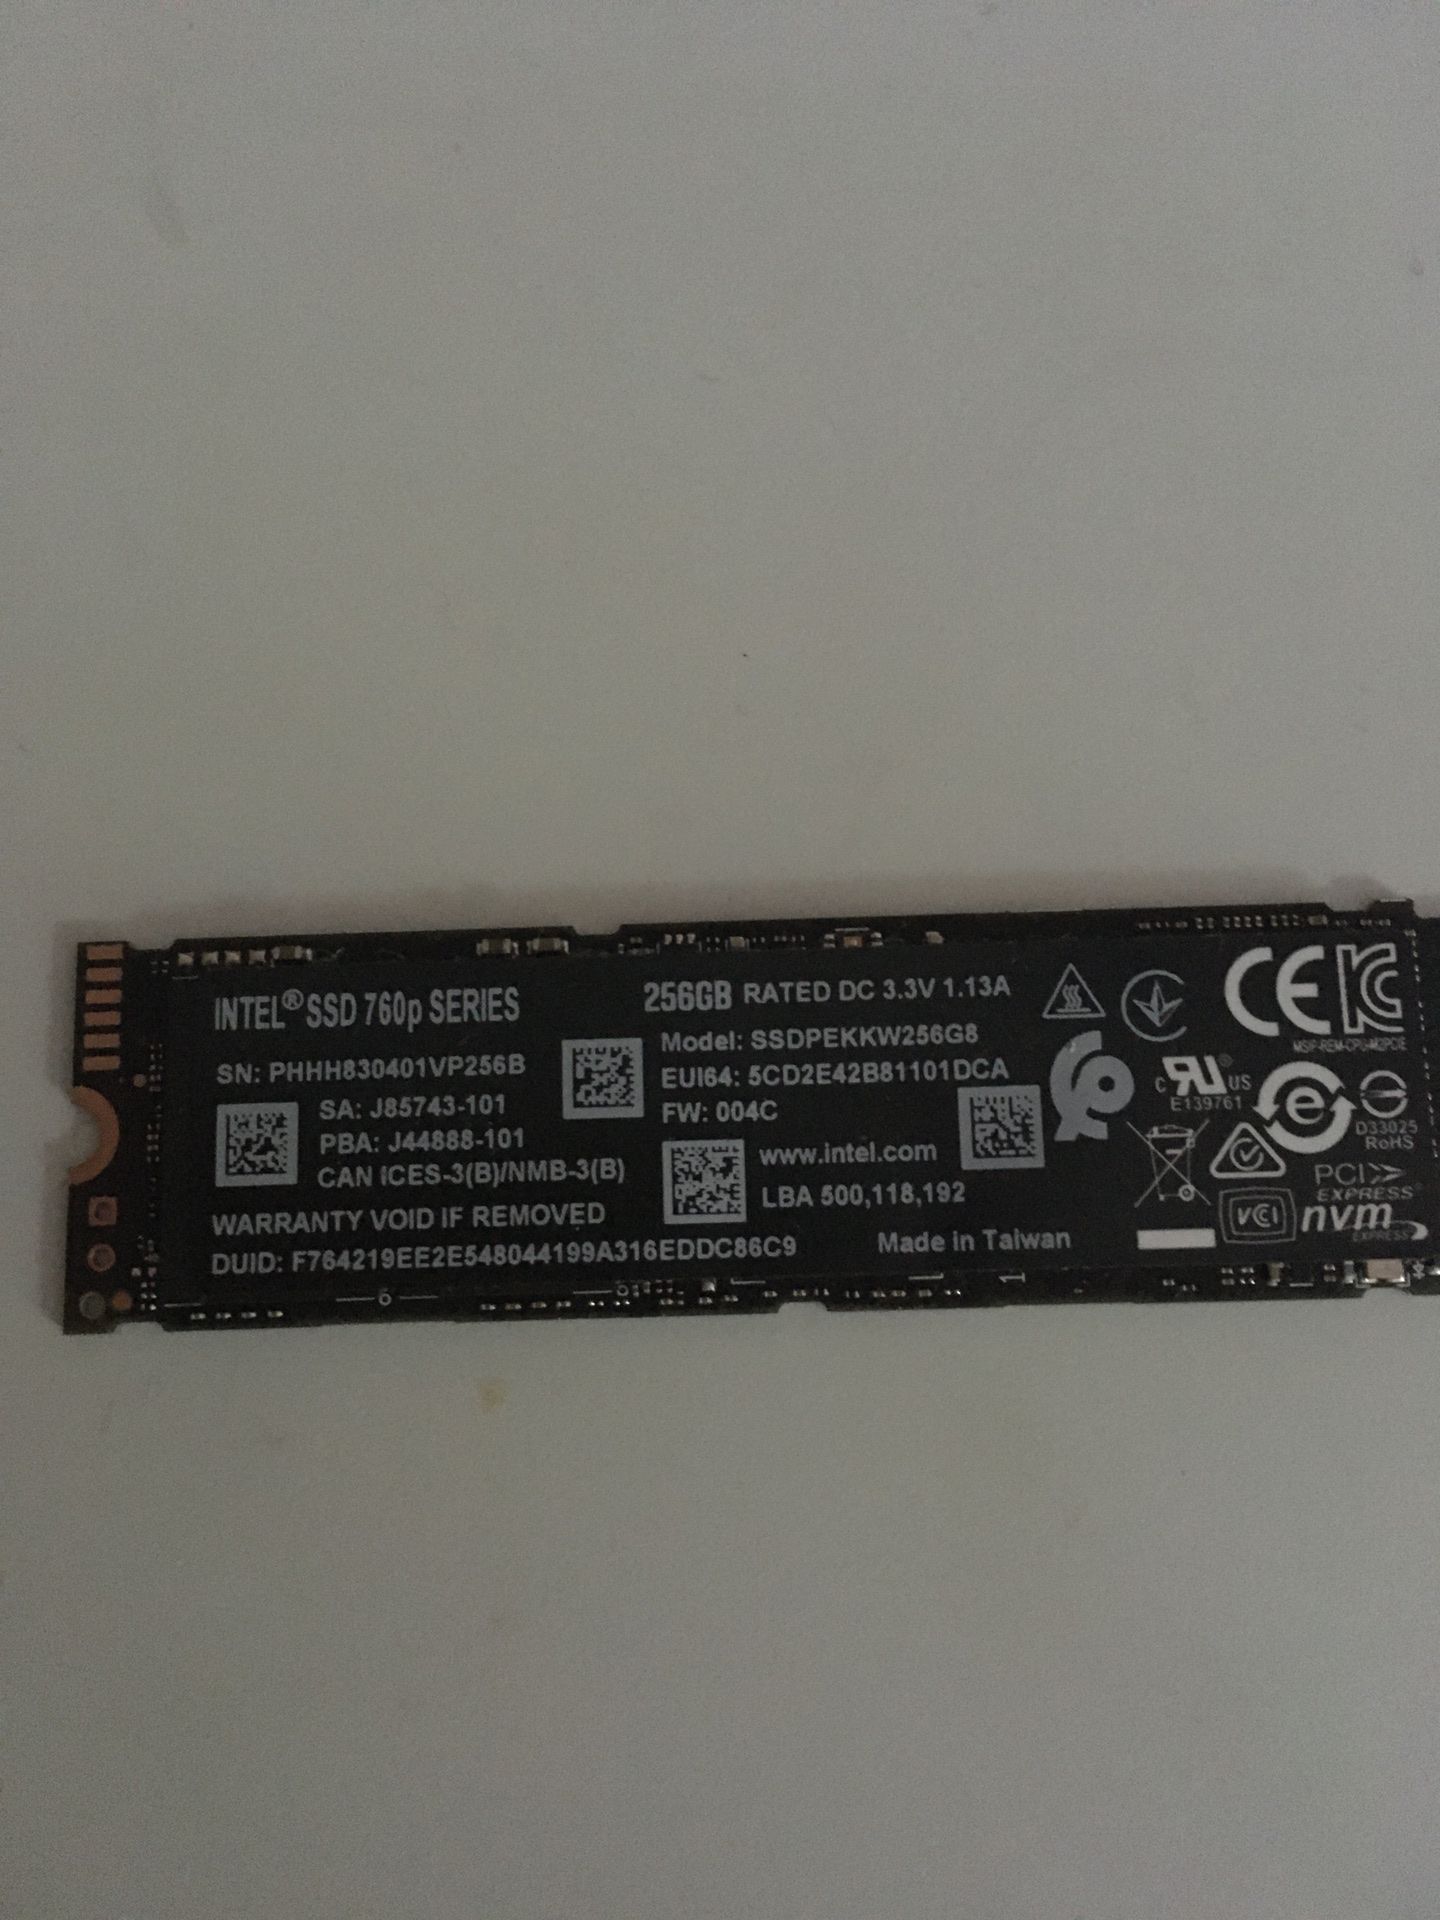 256 gig m.2 NVME SSD drive pulled from working gaming laptop. Asking 40 obo trades considered